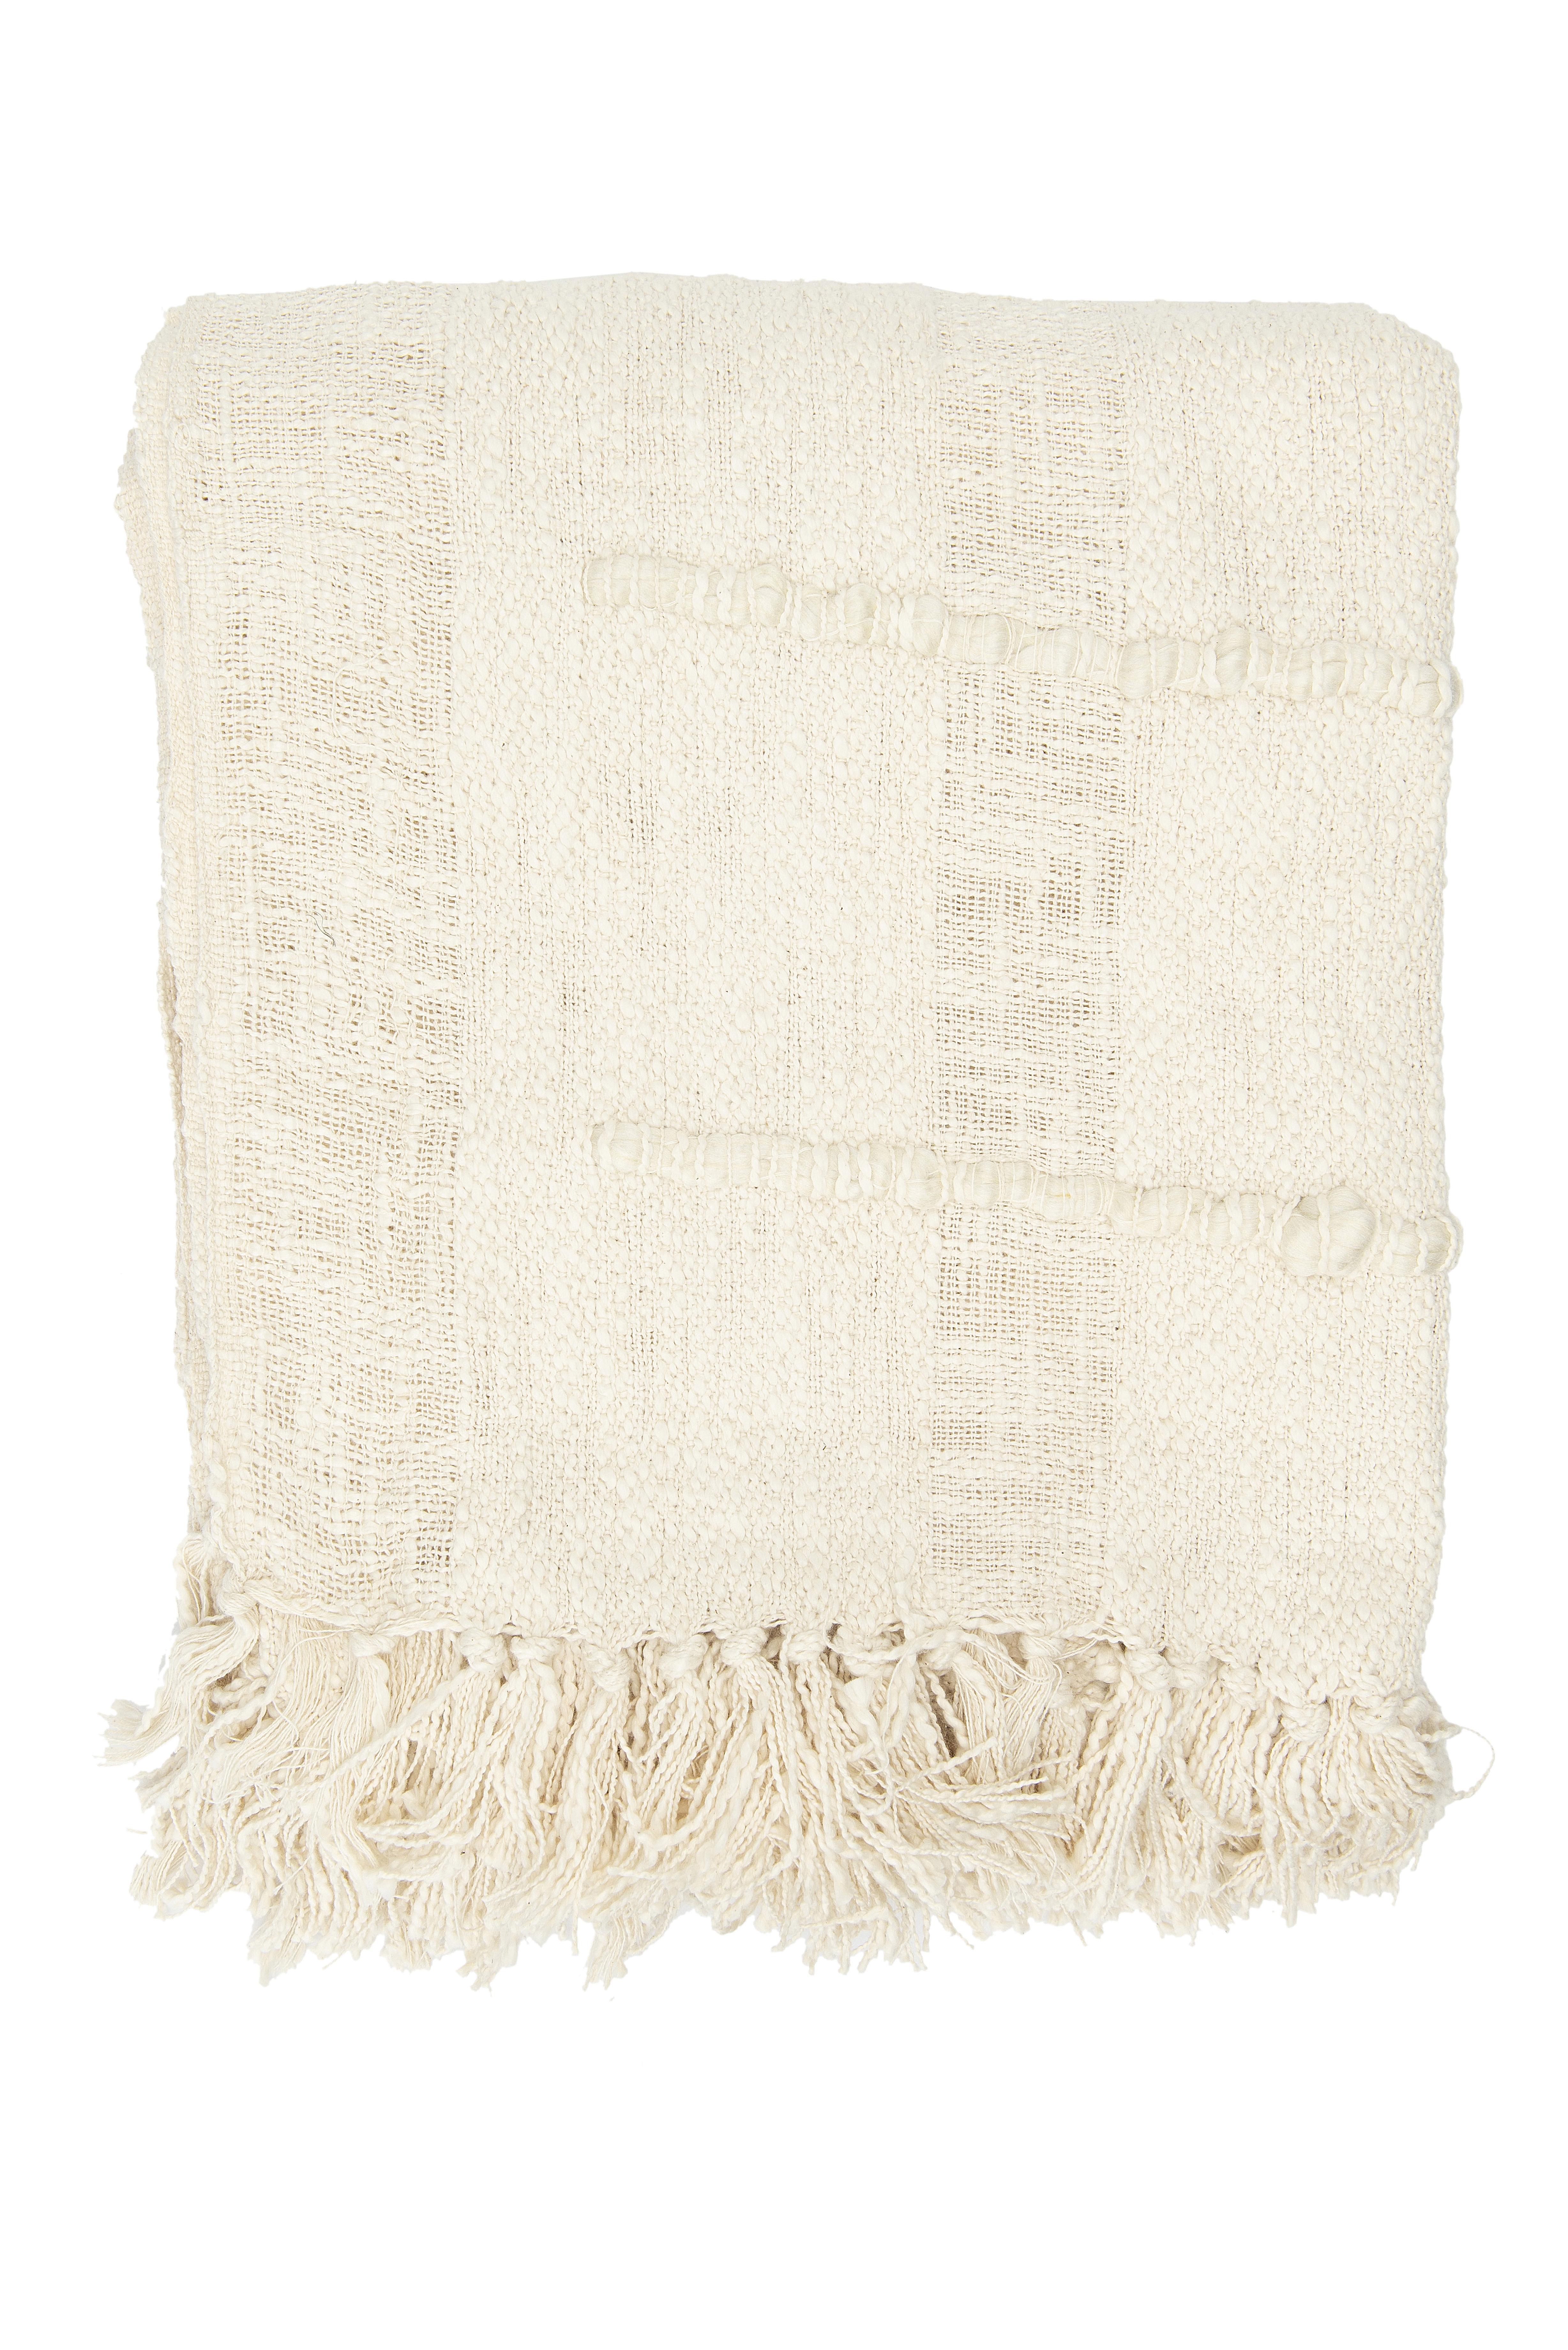 Cream Cotton Blend Chenille Throw with Fringe - Image 0